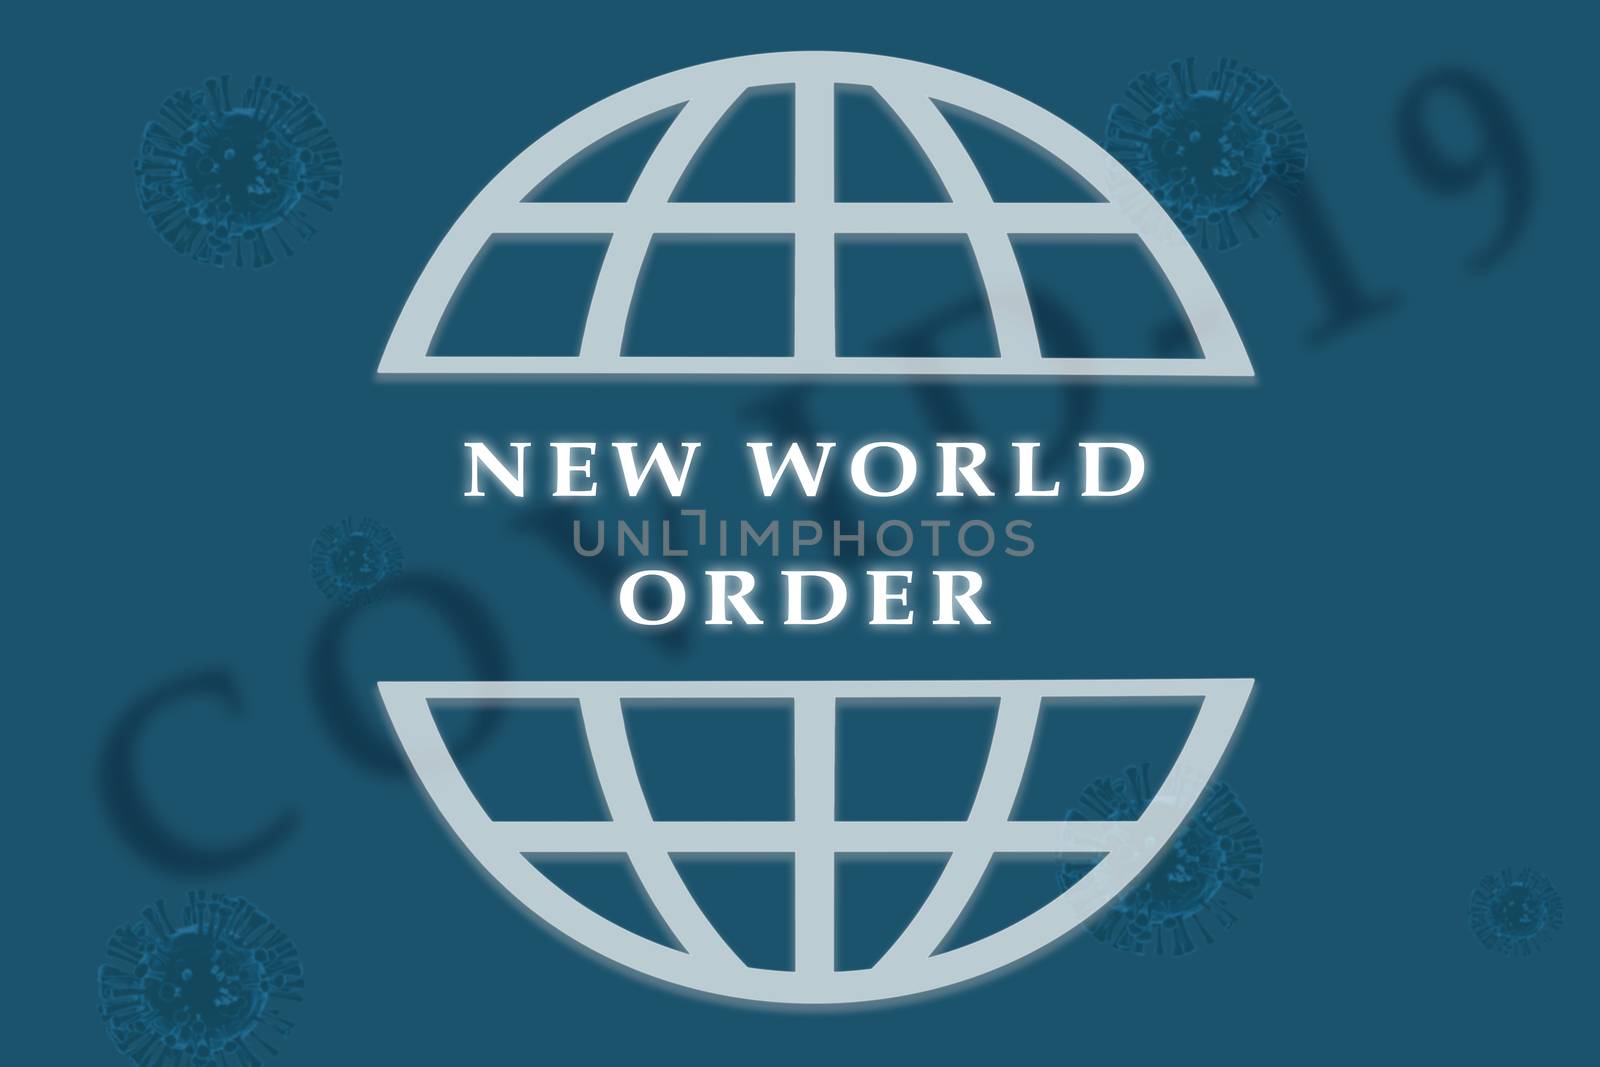 Concept of New world order in geopolitics after covid-19 or coronavirus outbreak showing with 3d rendered illustration of virus as background. by lakshmiprasad.maski@gmai.com